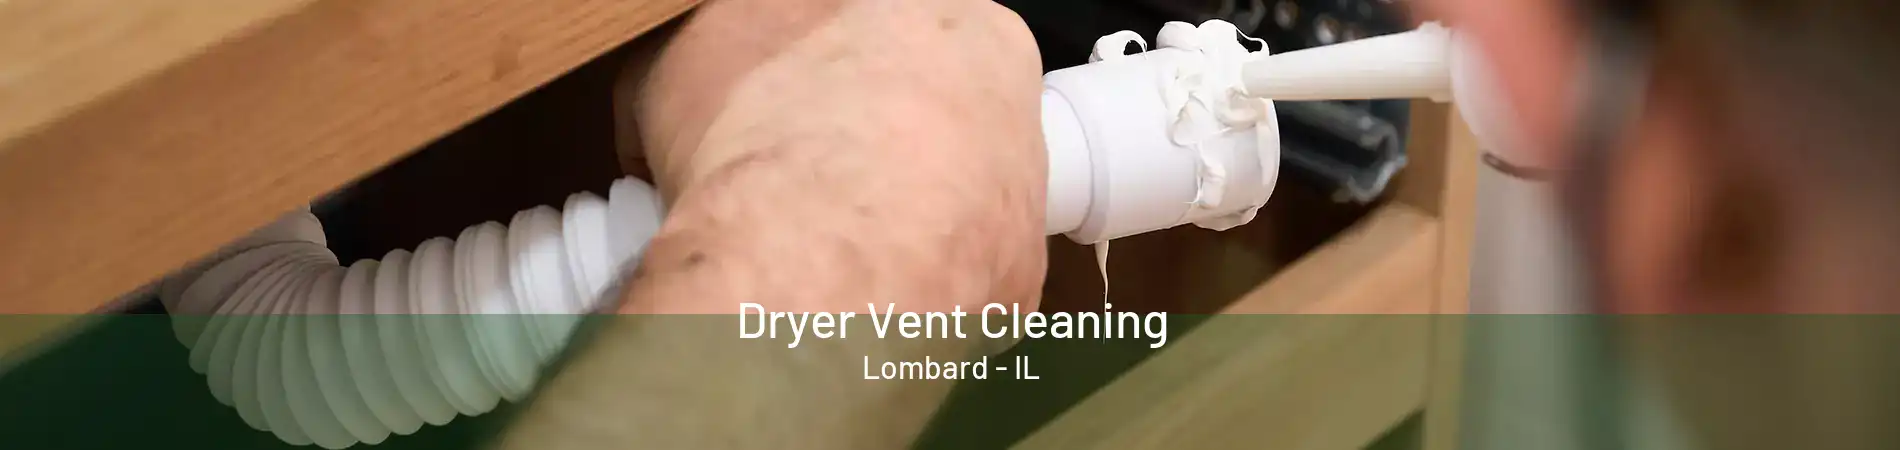 Dryer Vent Cleaning Lombard - IL